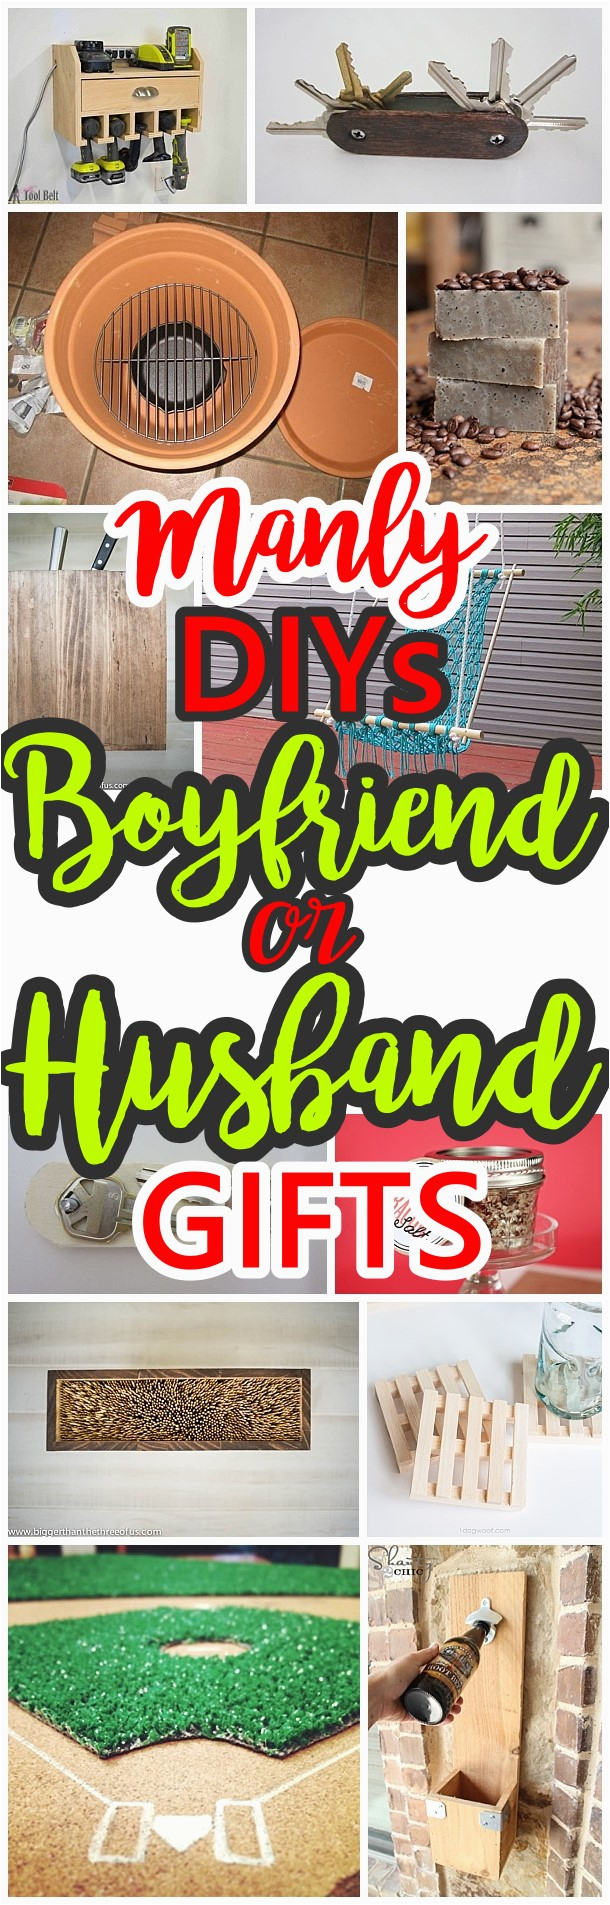 manly do it yourself boyfriend and husband gift ideas masculine diy crafts projects boyfriends husbands sons and brothers will love